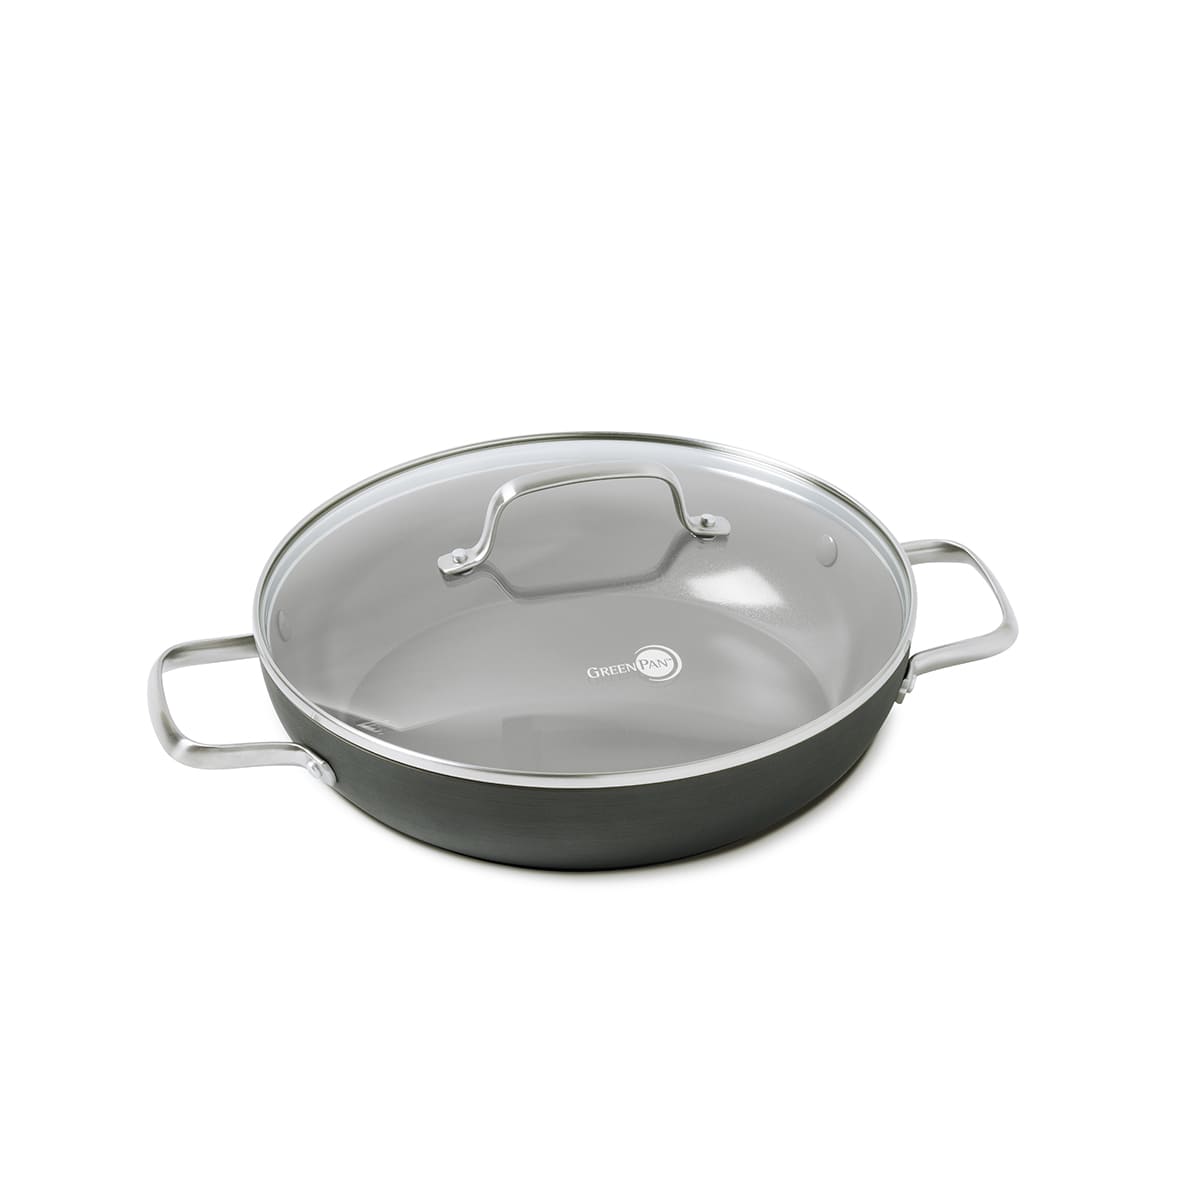 CC000121-001 - Chatham CHATHAM FRYING PAN WITH LID, DARK GREY - 28CM - Product Image 1